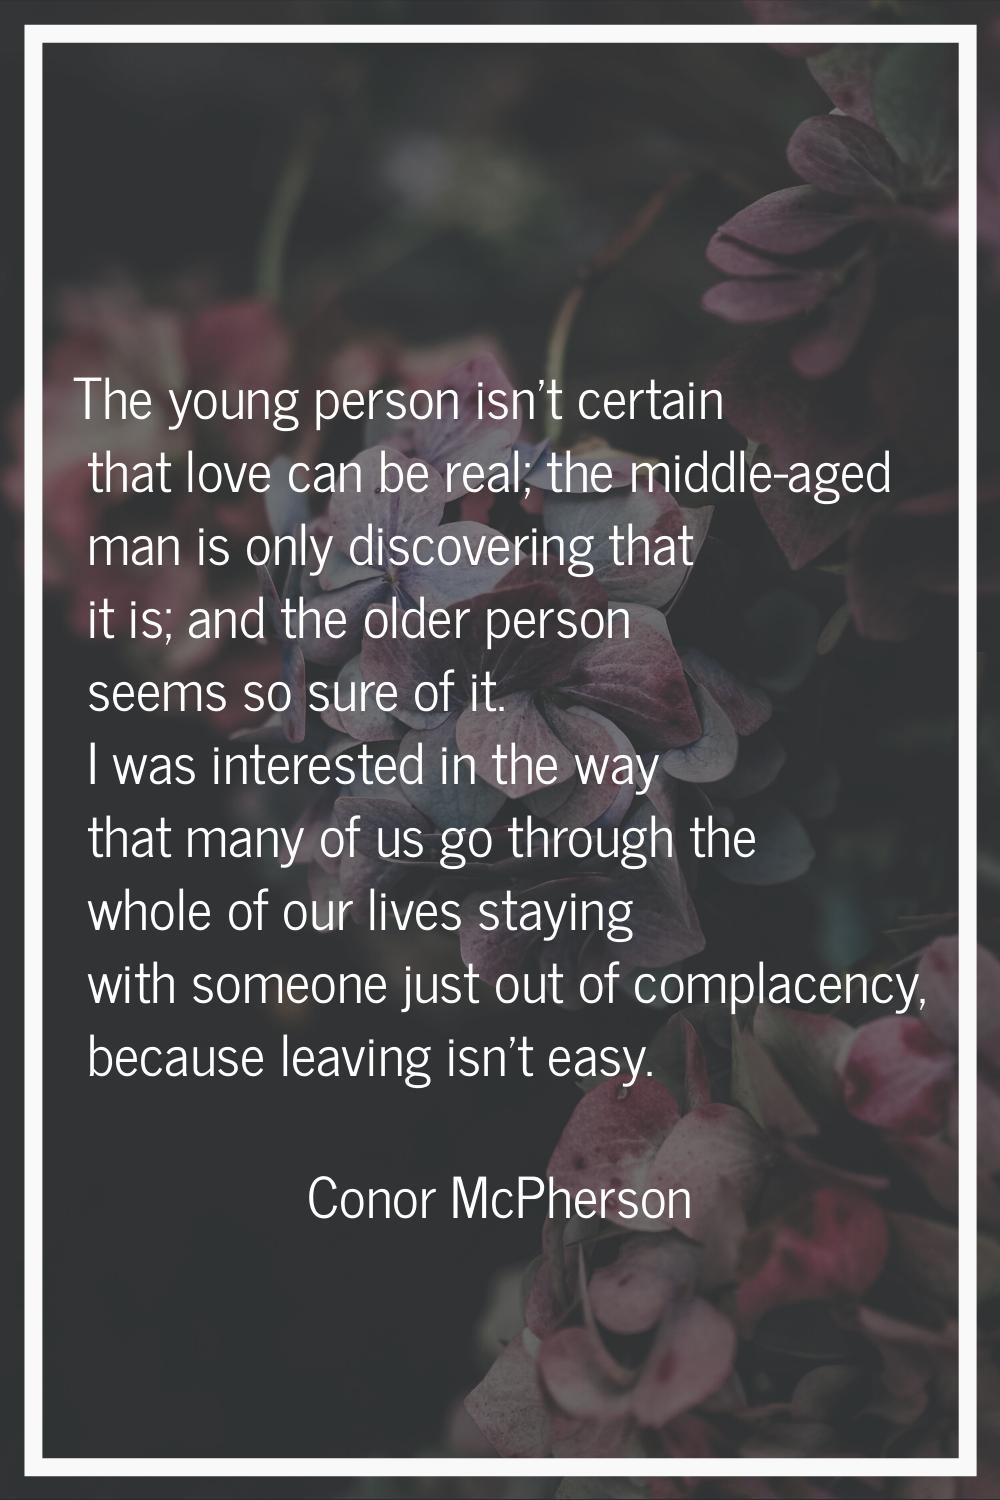 The young person isn't certain that love can be real; the middle-aged man is only discovering that 